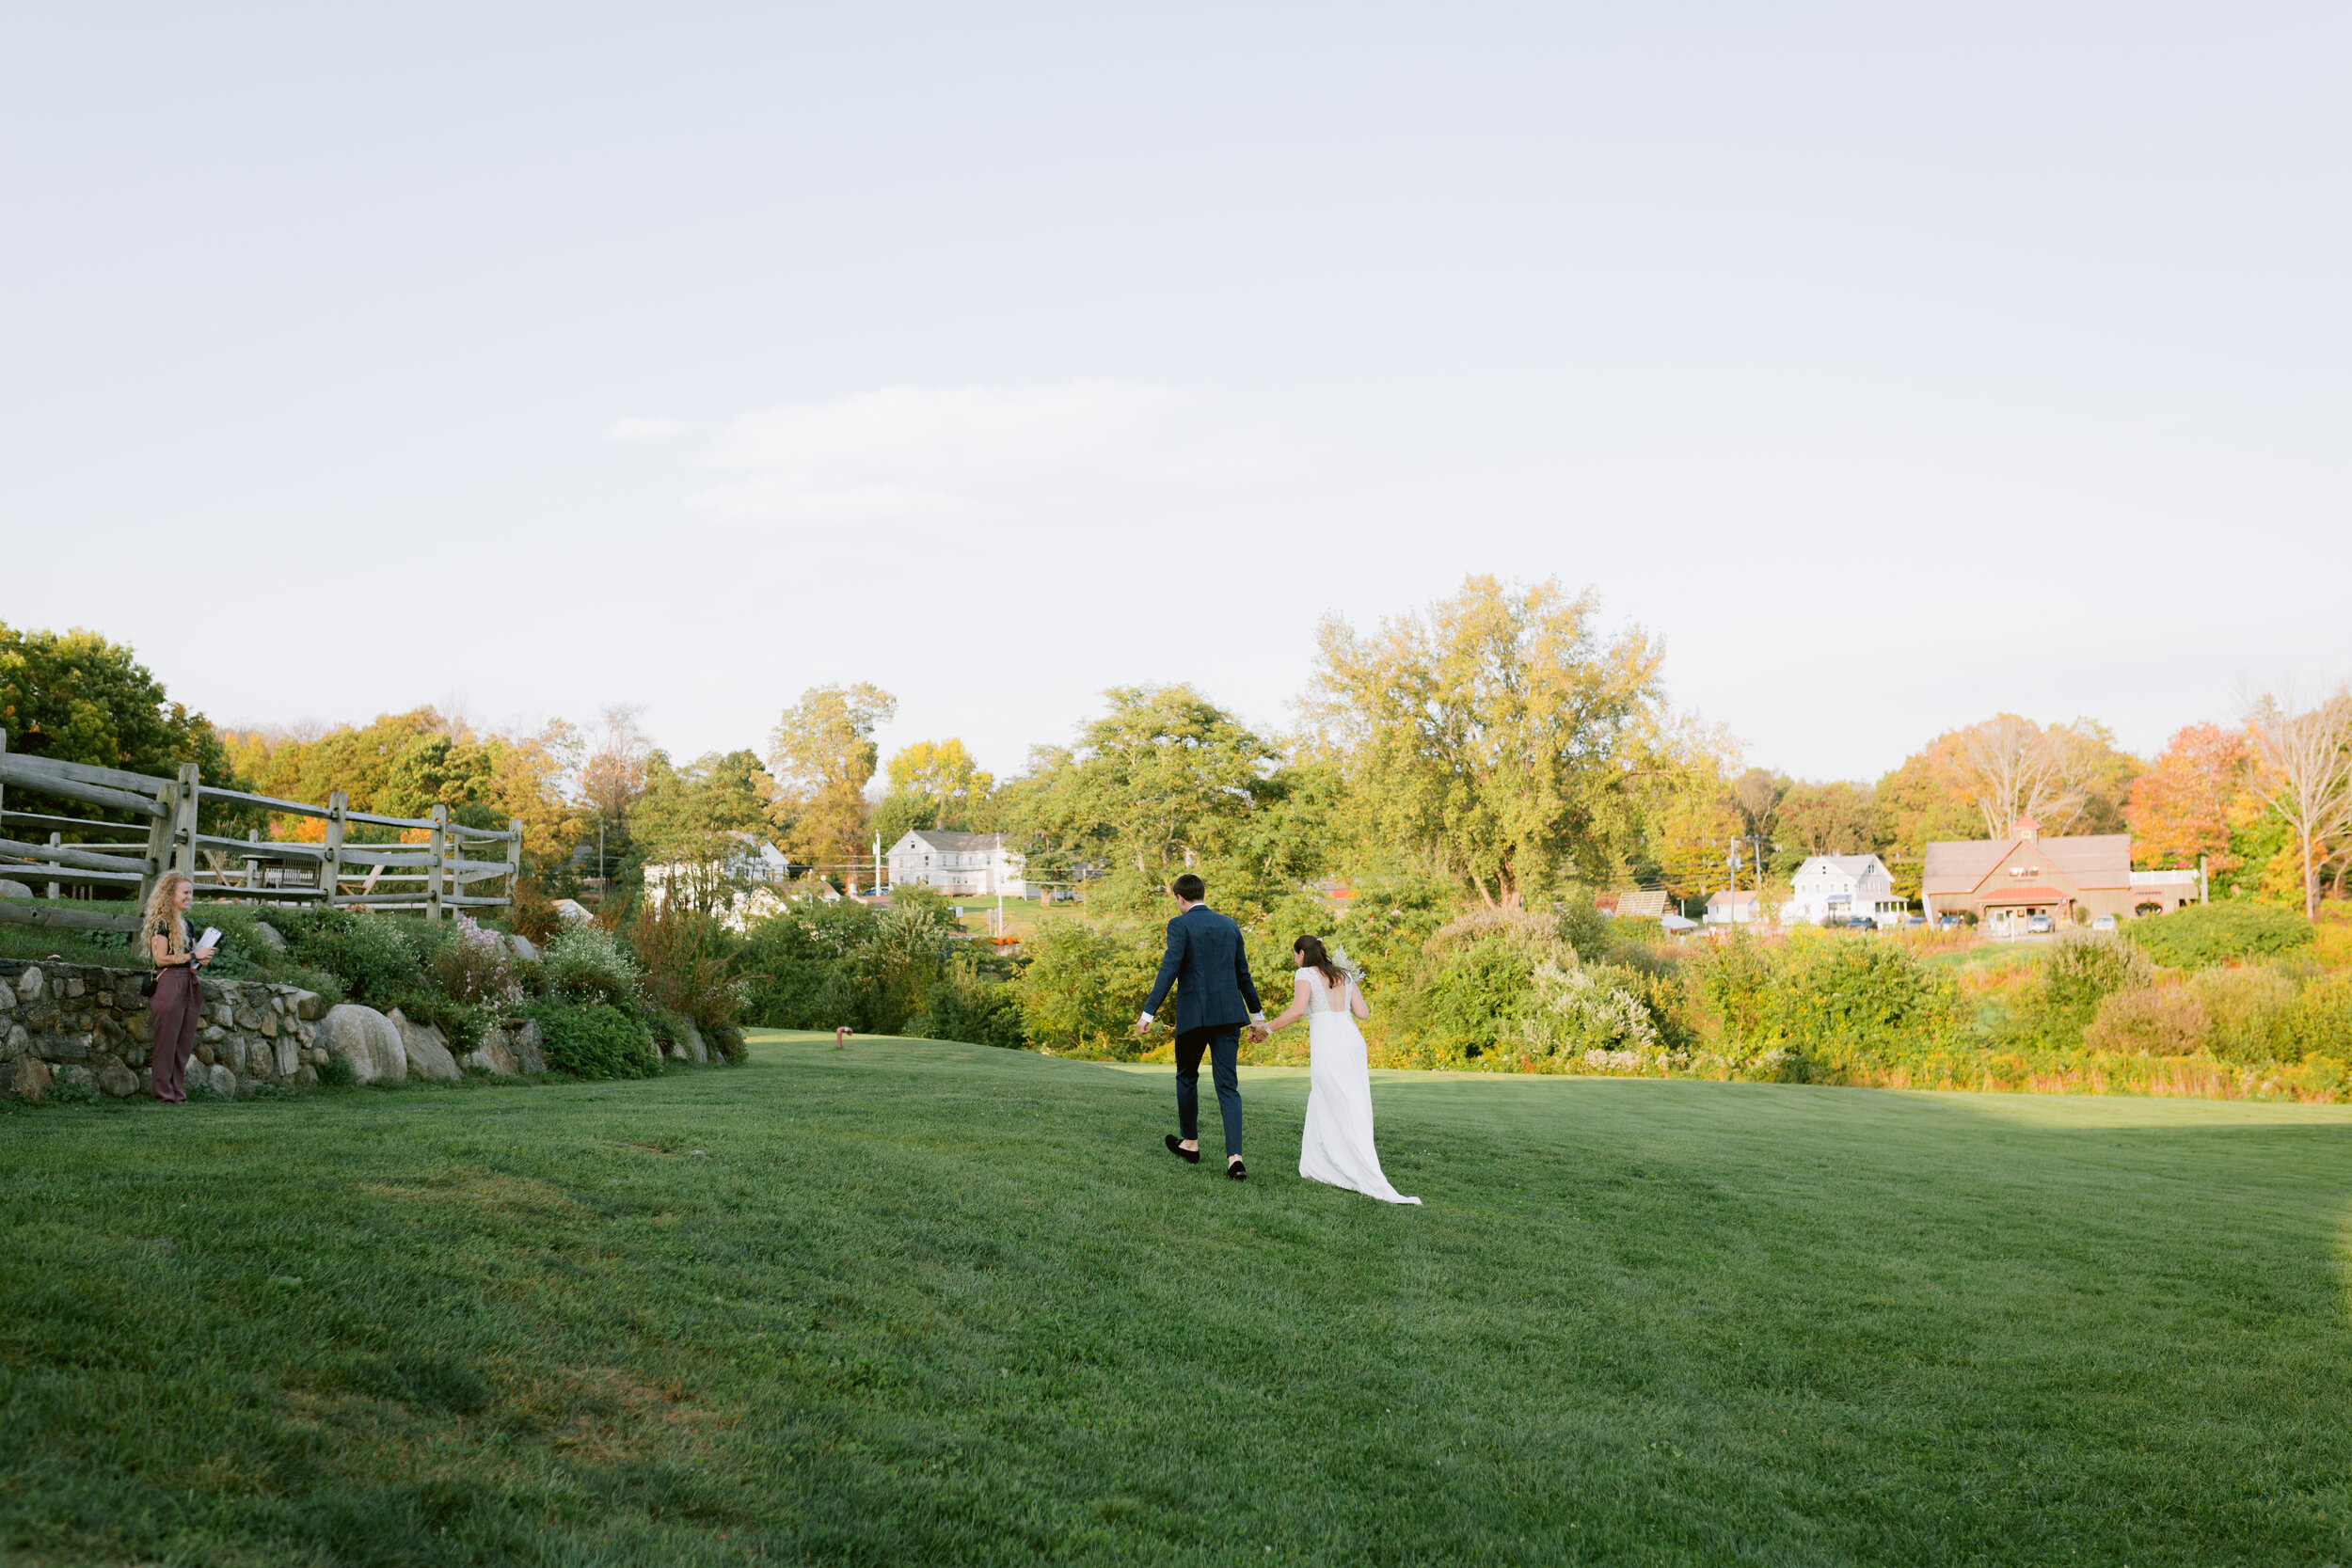 South Farms Wedding in Morris, CT | Kate & Nate - Pearl Weddings & Events